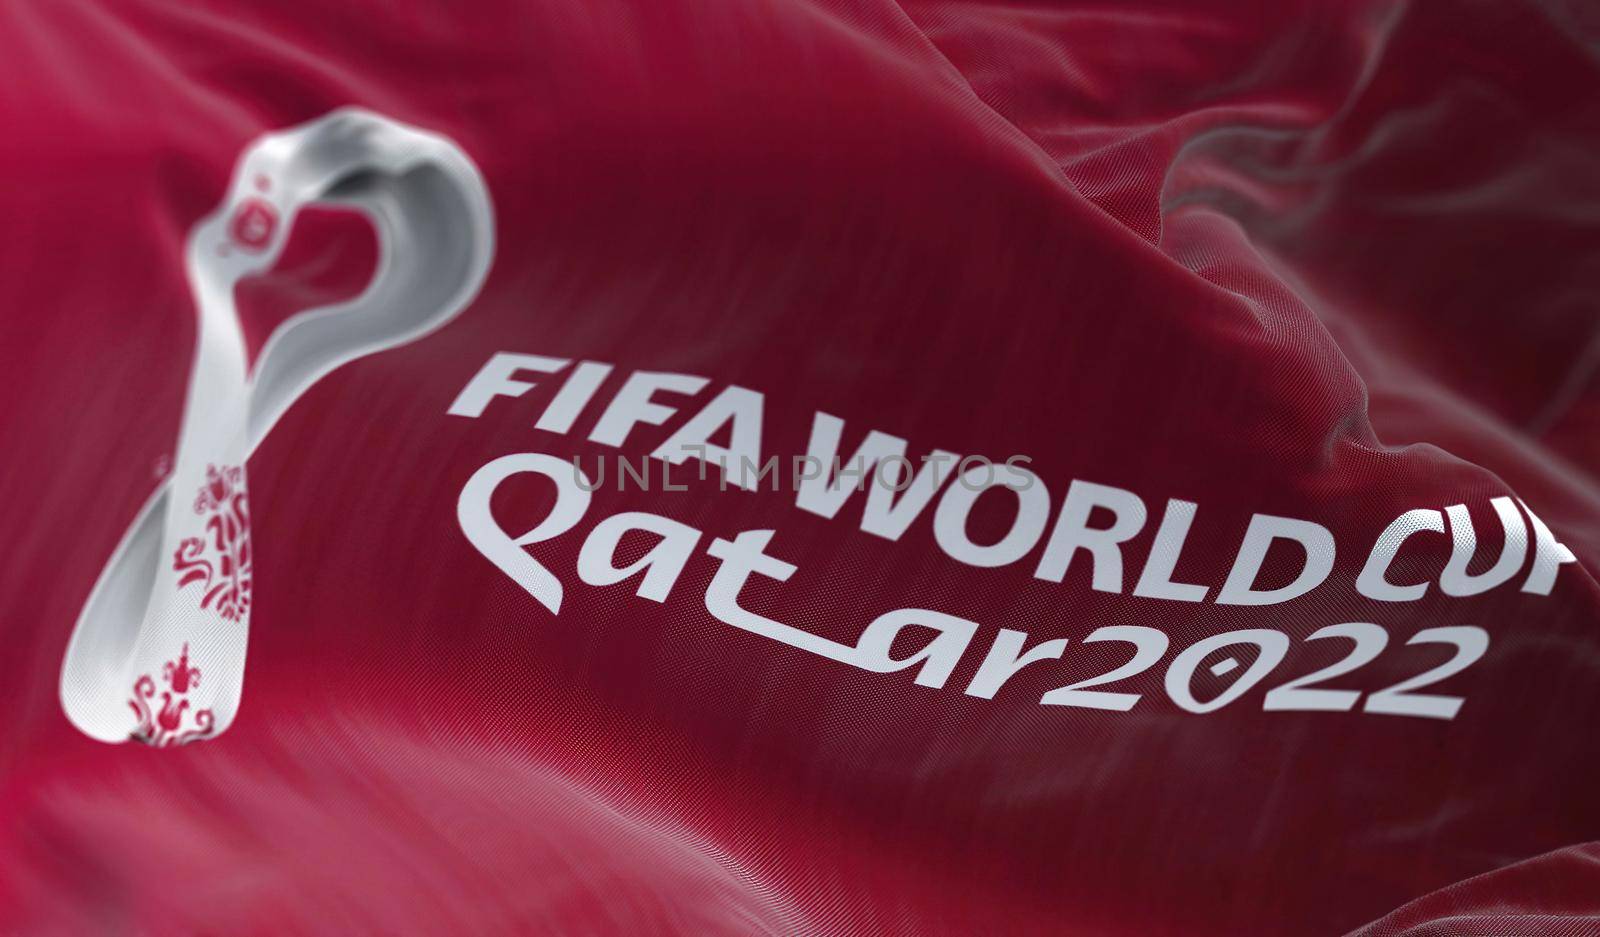 Doha, Qatar, April 2022: Flag with the Qatar 2022 Fifa World Cup logo flapping in the wind by rarrarorro